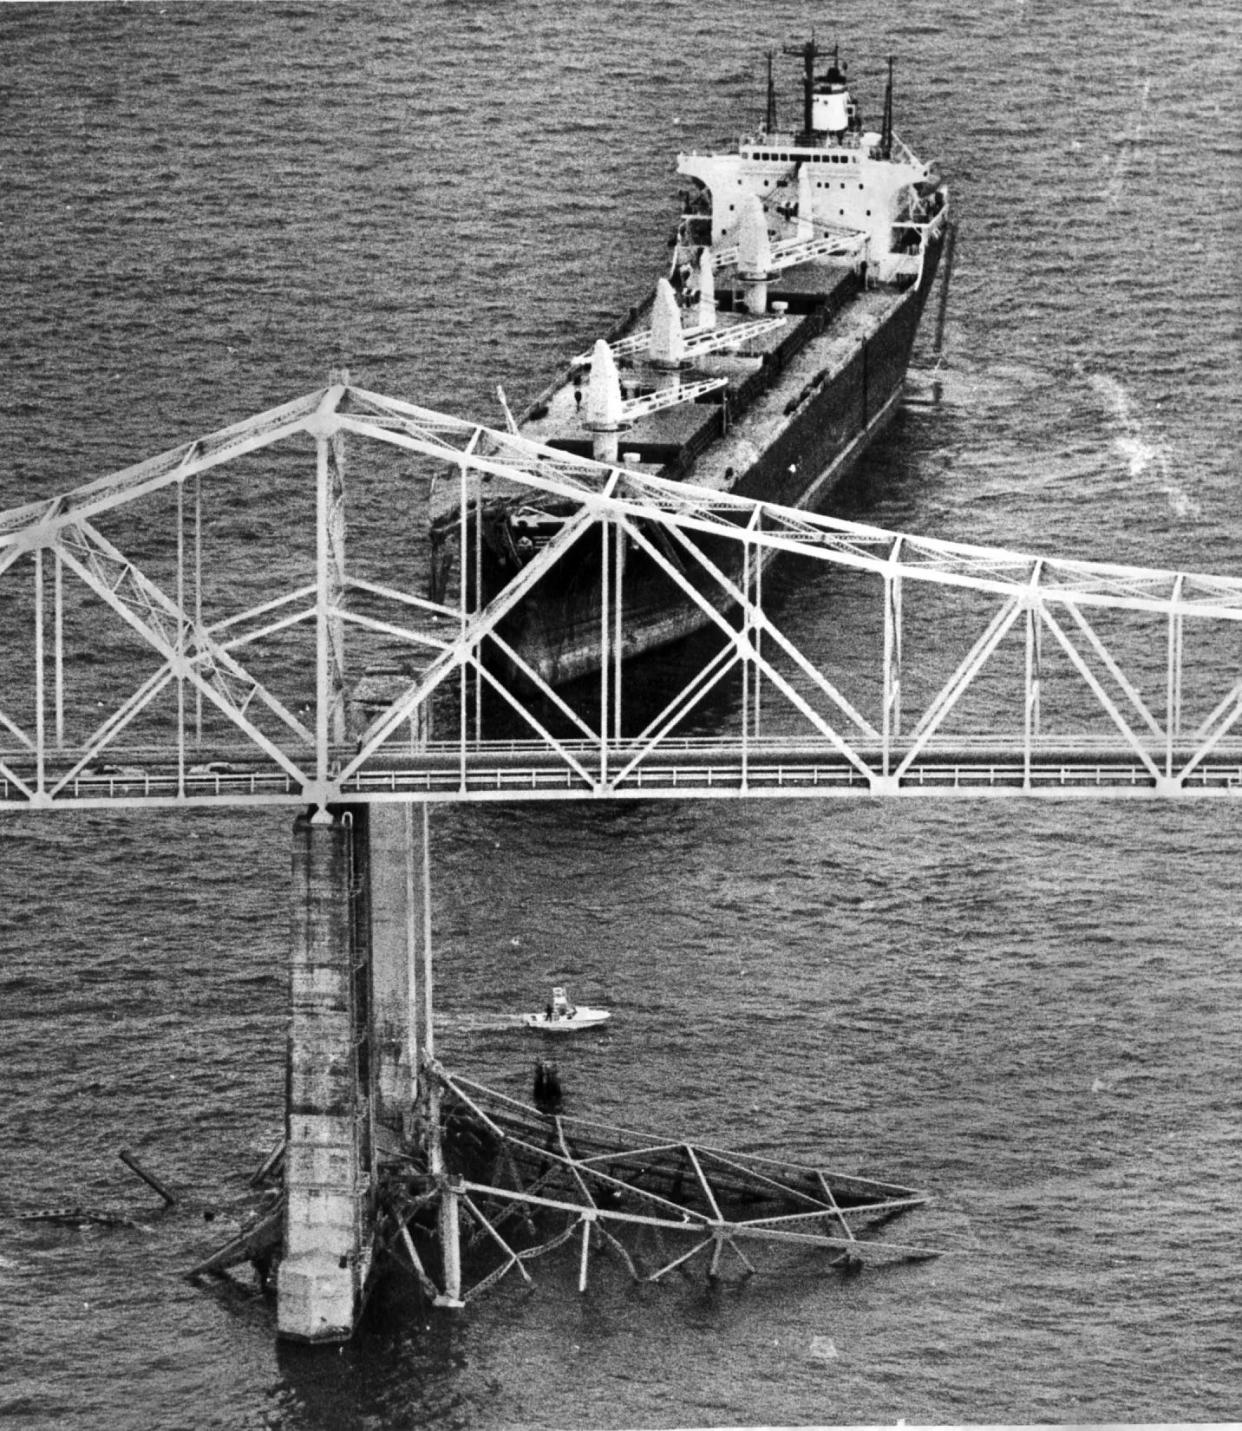 May 9, 1980; Tampa, FL, USA; The Summit Venture sits in Tampa Bay with part of the Sunshine Skyway on its deck in 1980. The ship crashed into the bridge, killing 35 people.